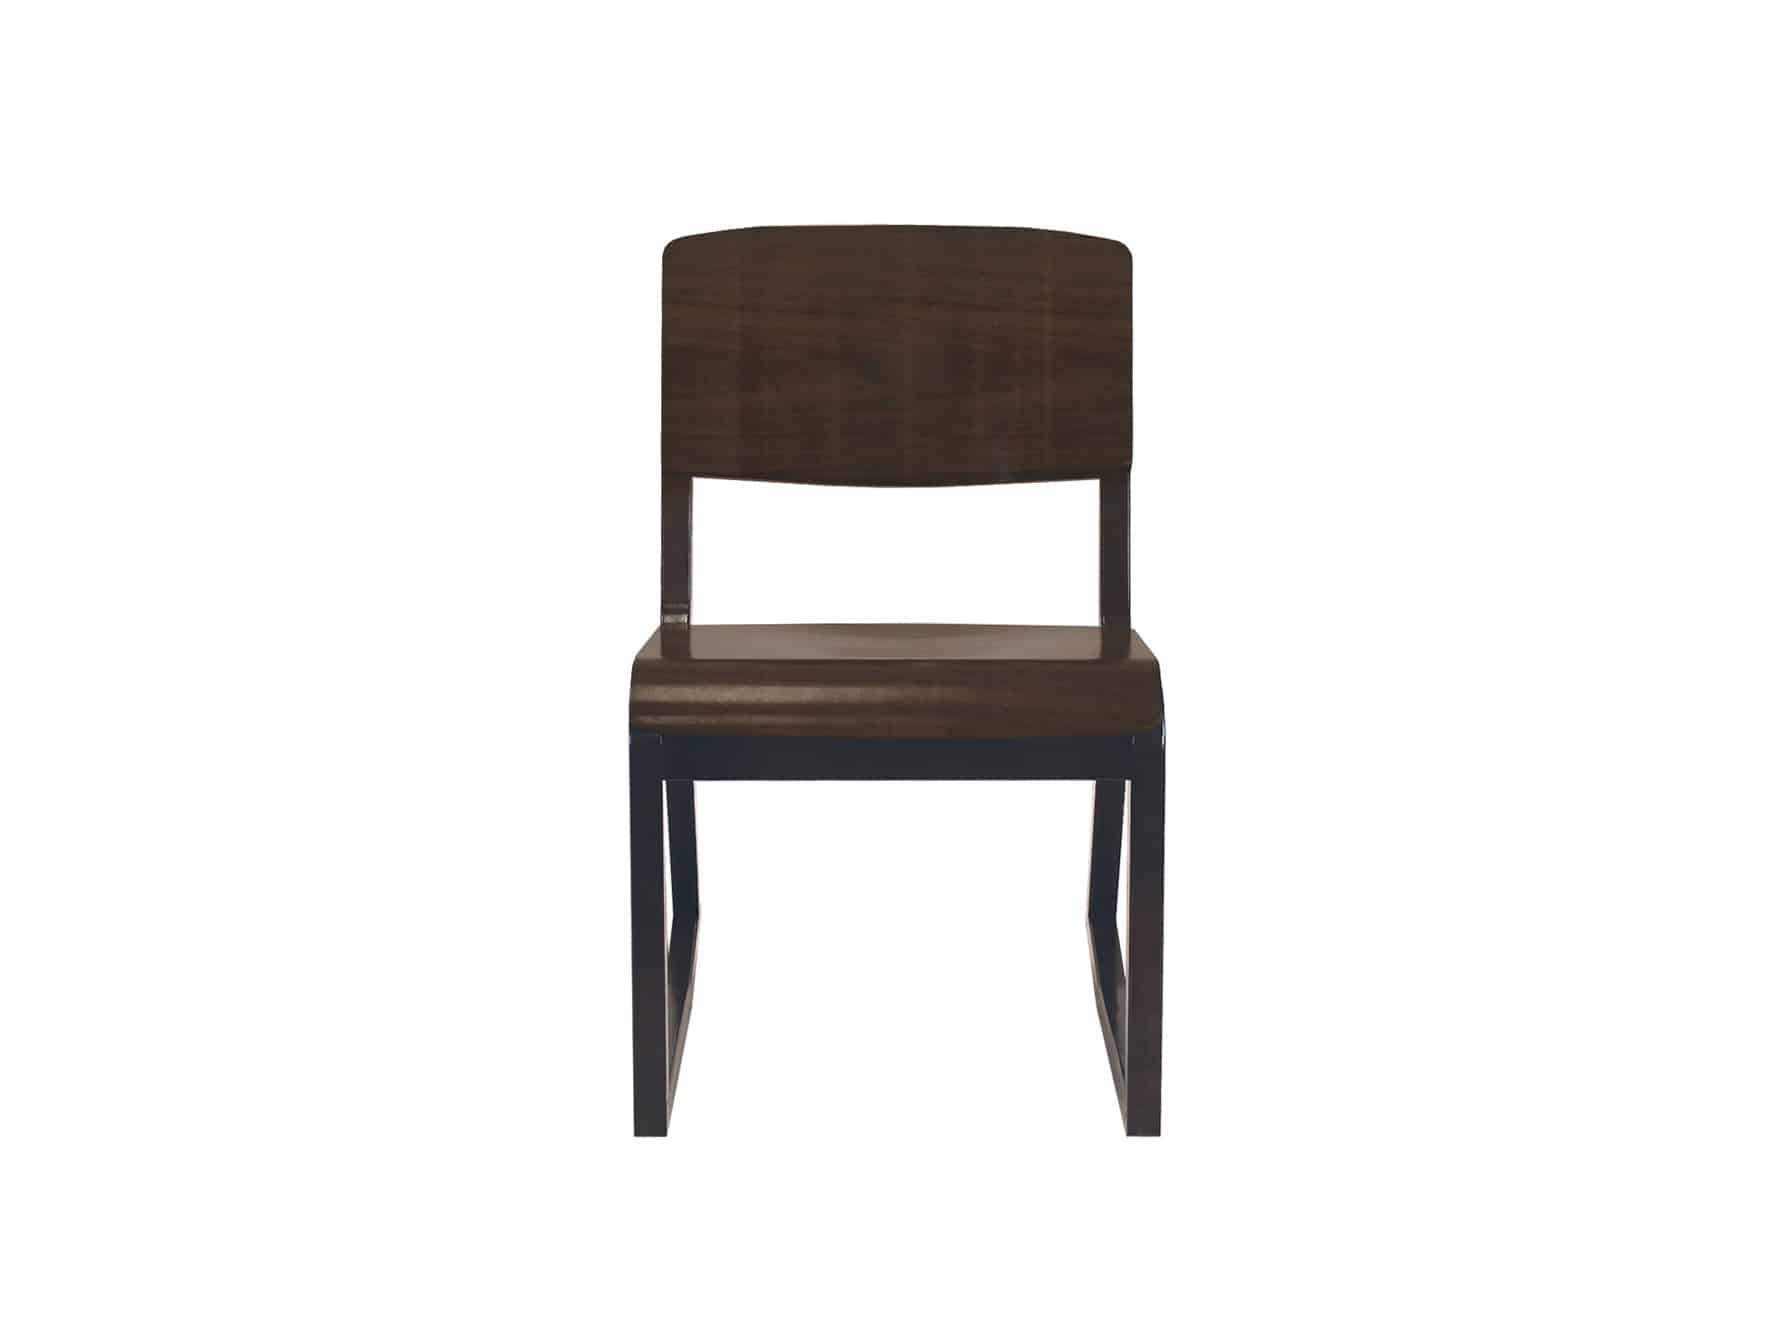 Front view of PlyWedge 2-Position Chair in Walnut Finish